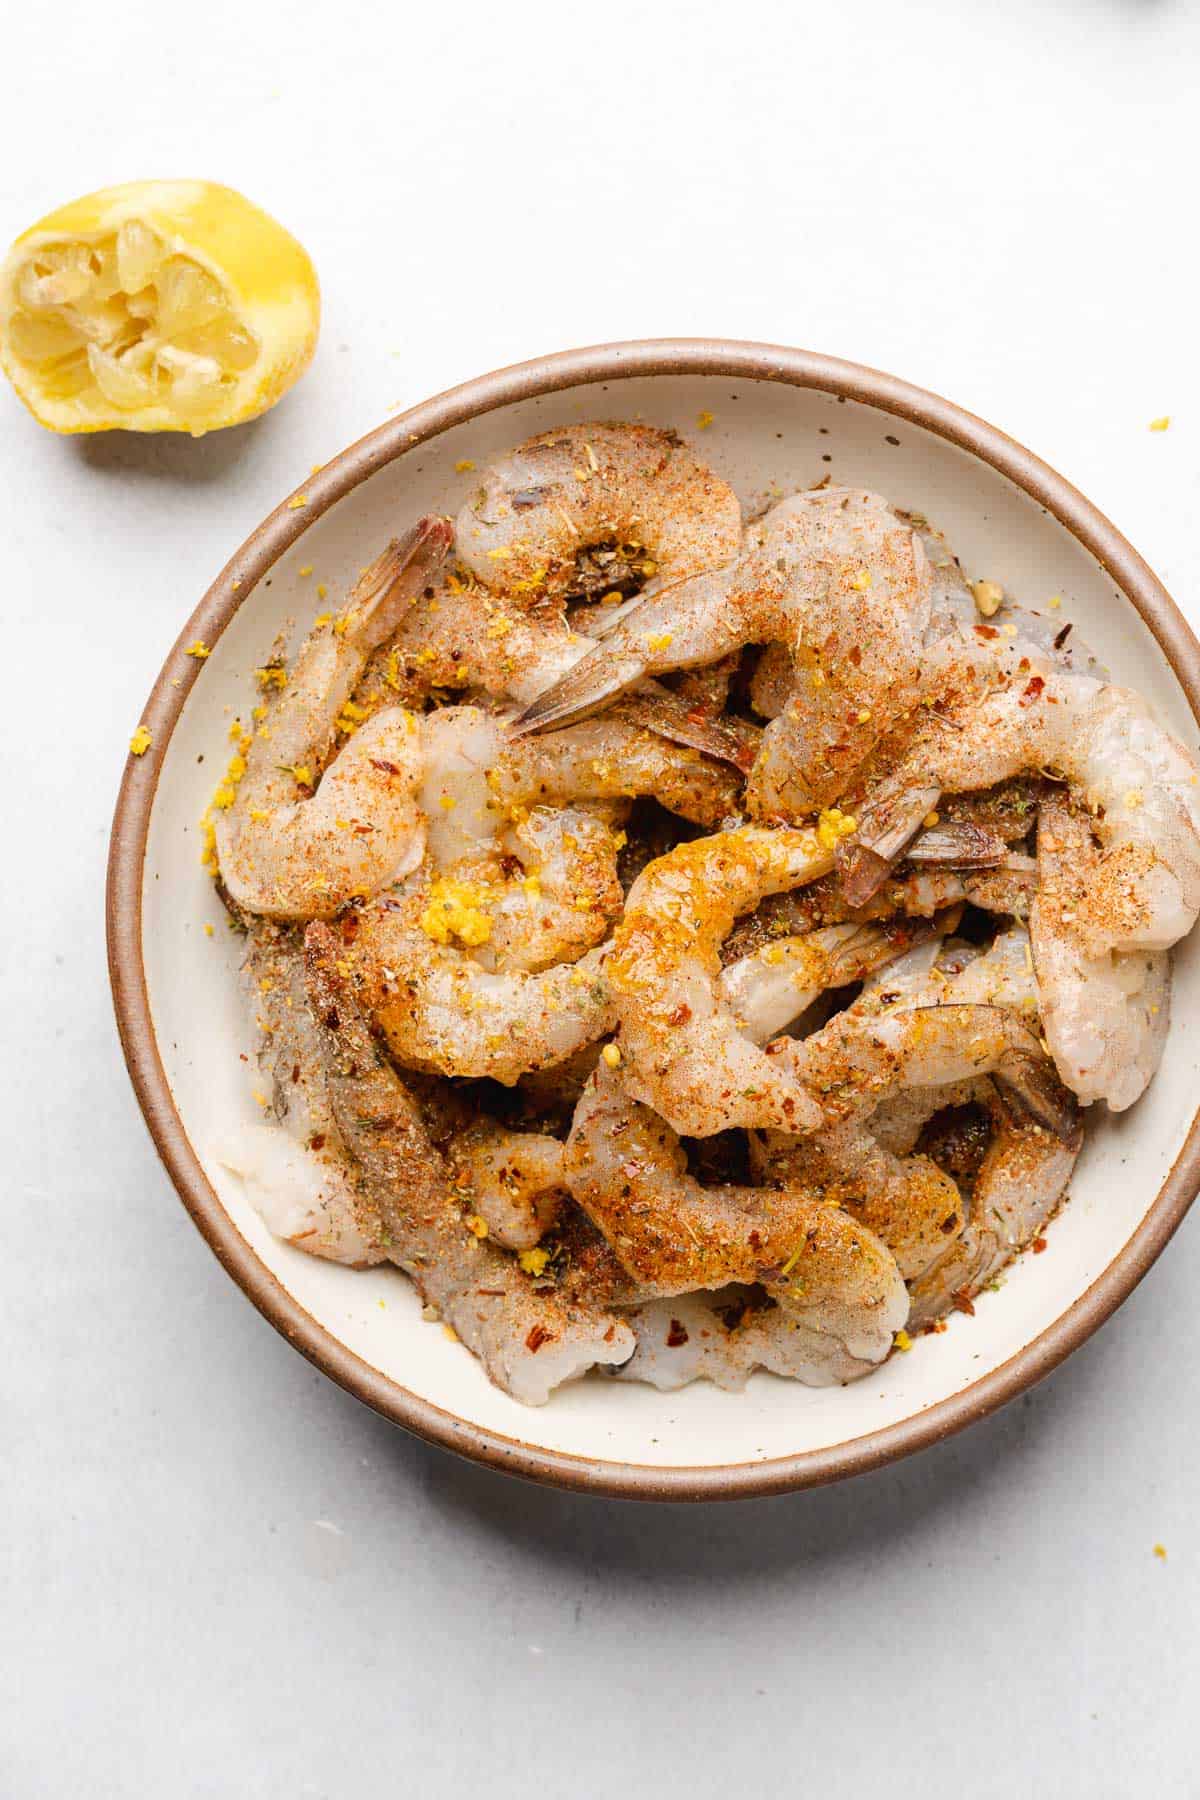 shrimp in a bowl with seasonings, olive oil and lemon juice and zest